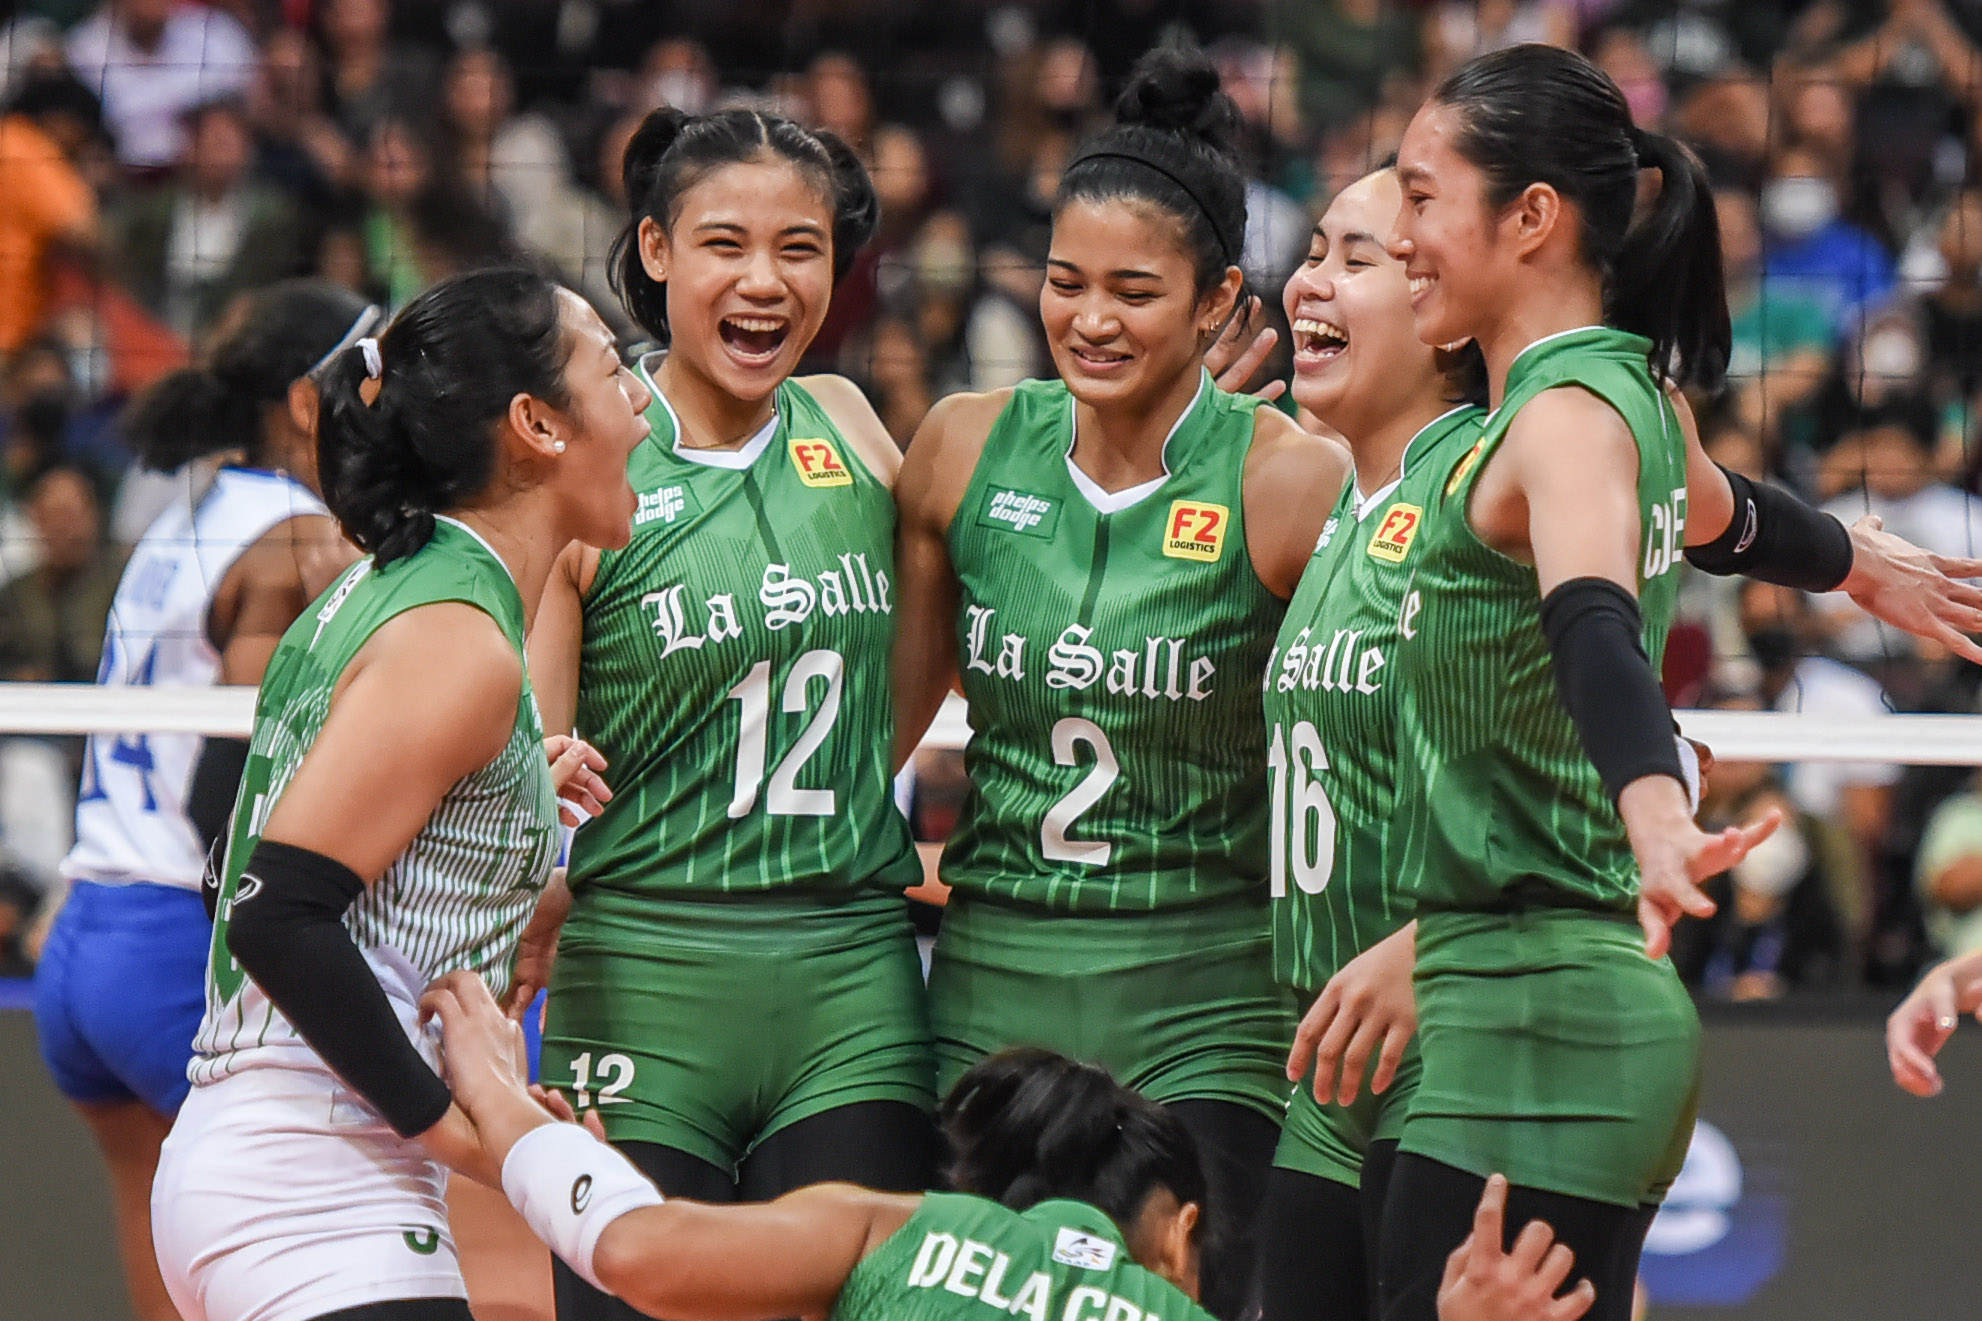 La Salle Lady Spikers destroys Ateneo for 11th straight win since 2017 ...